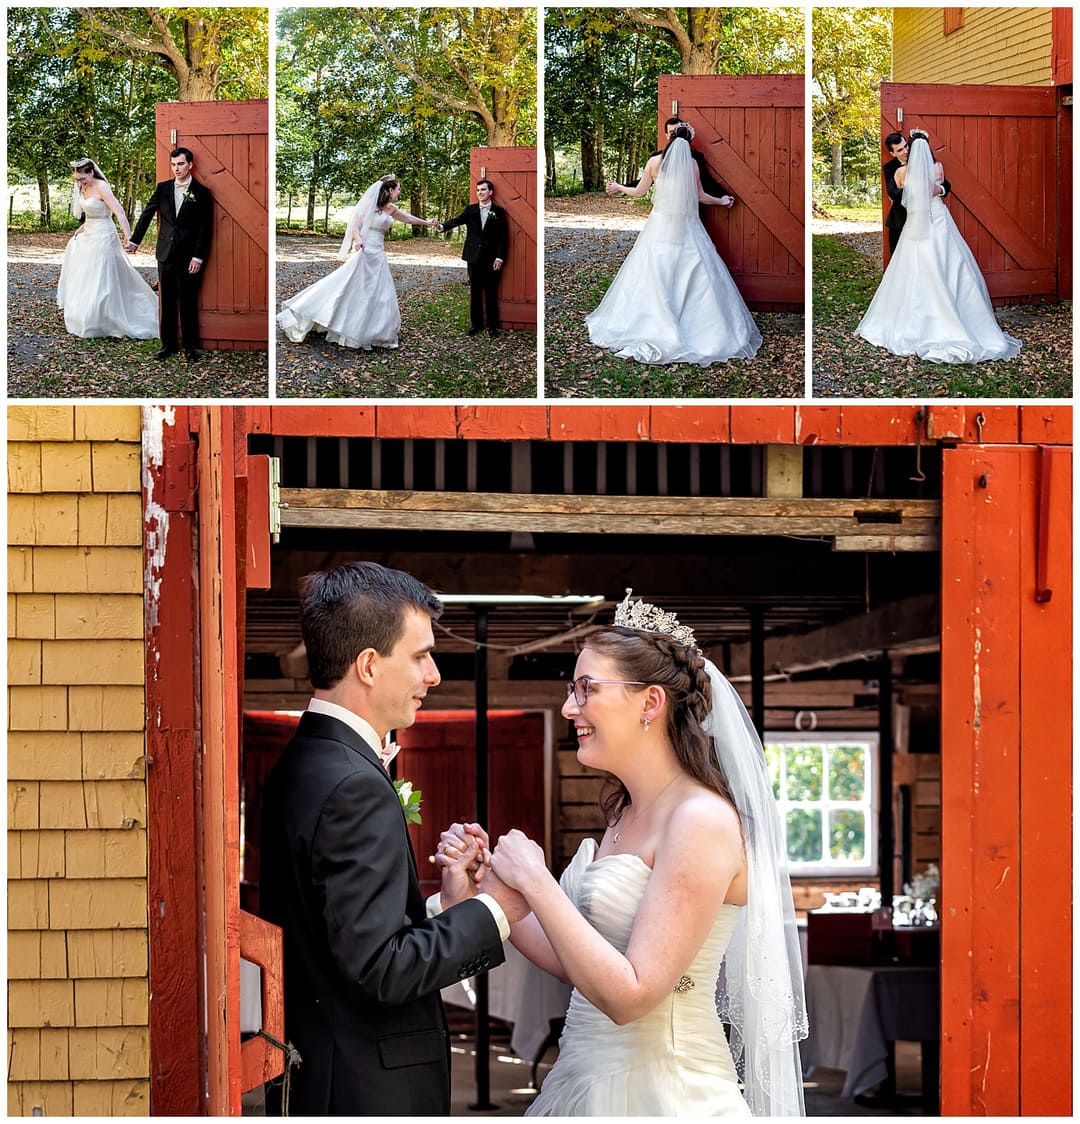 The bride and groom have their first look by the barn doors of the Kinley Farm in Lunenburg, NS.